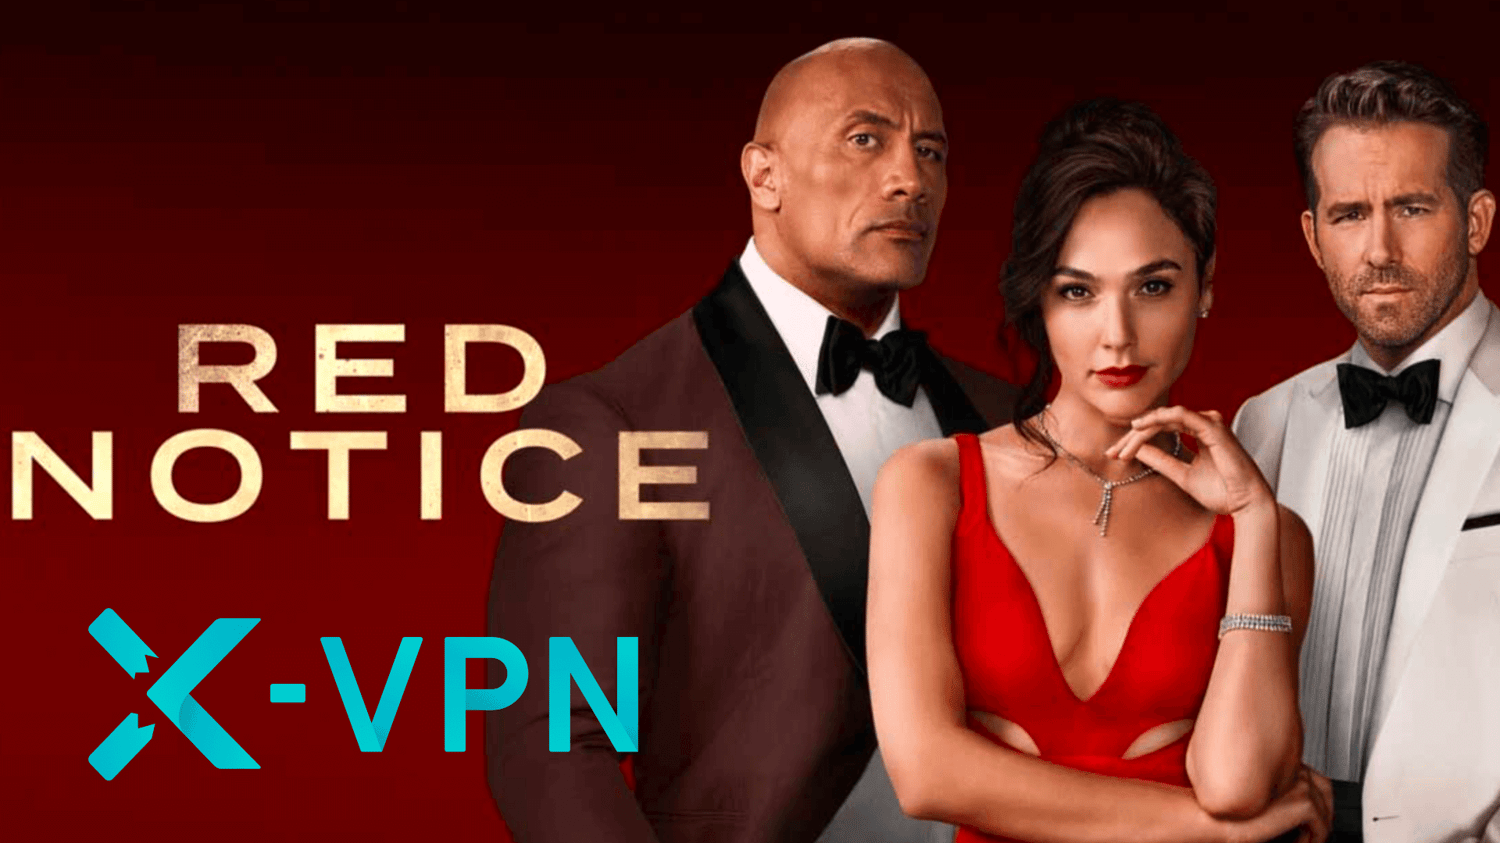 How to watch Red Notice on Netflix with X-VPN?